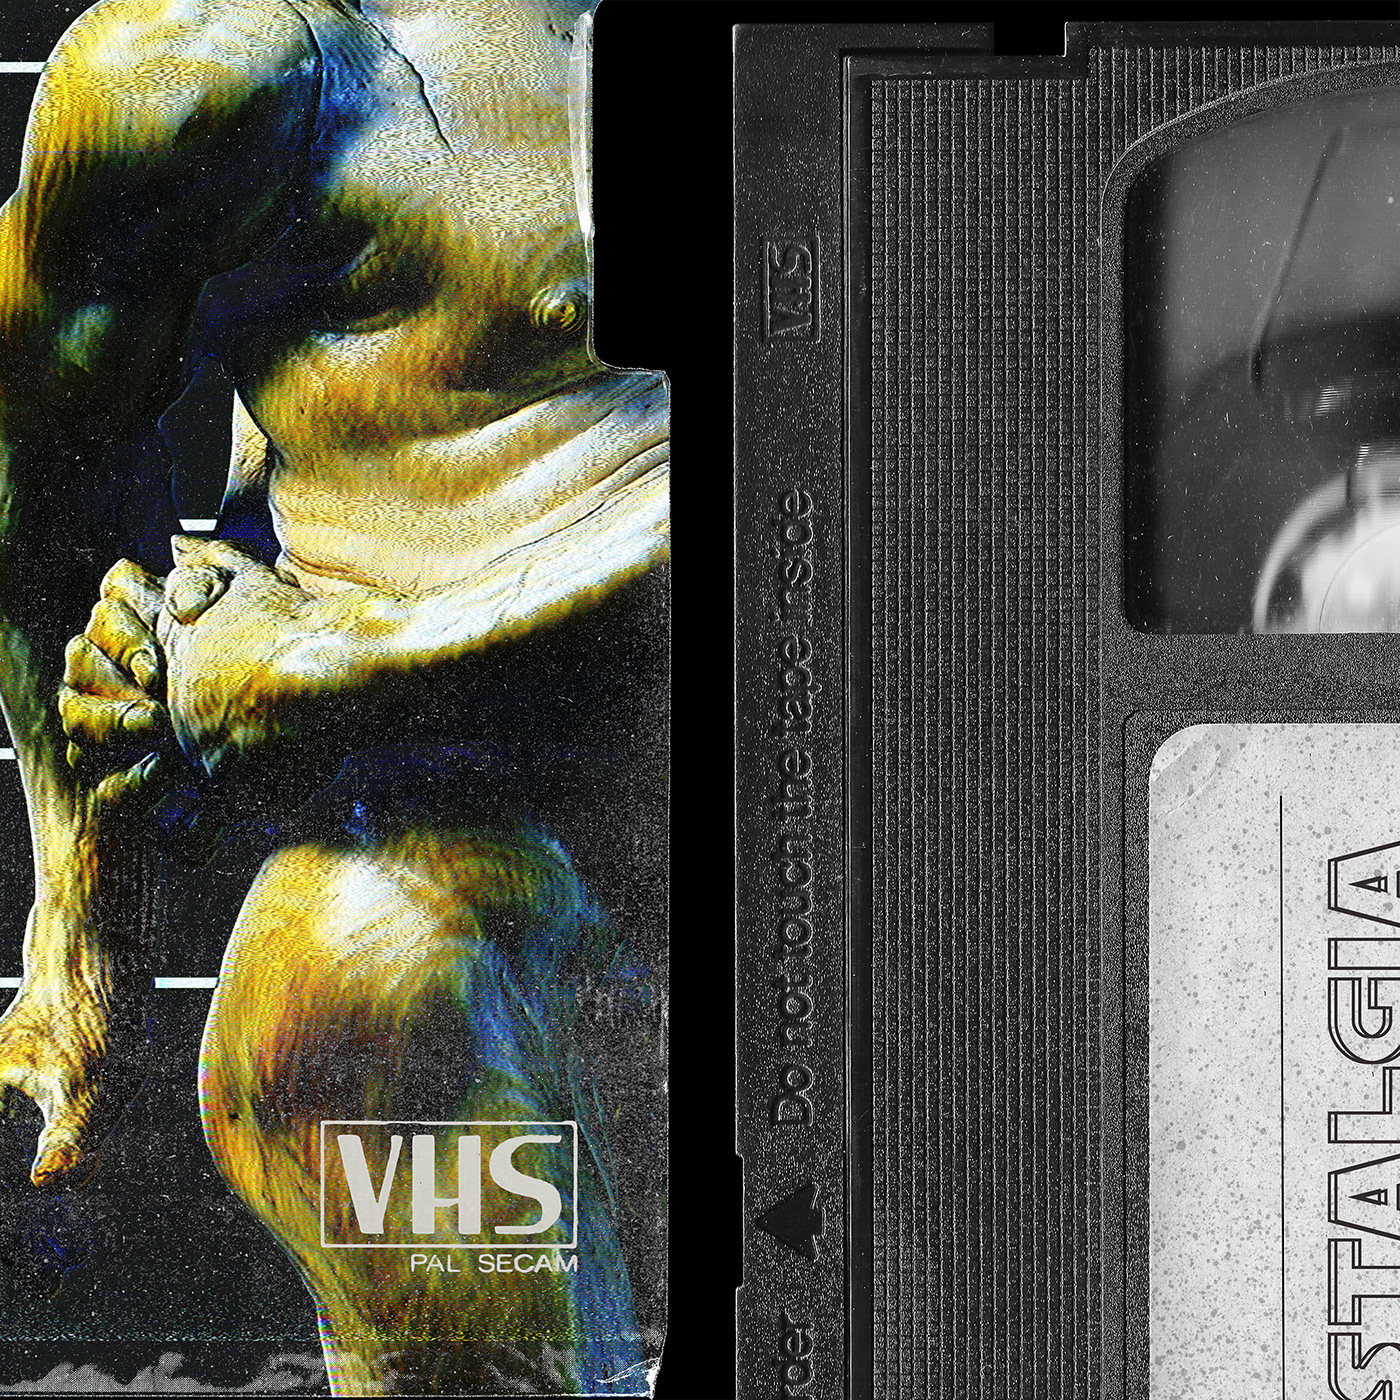 VHS Tape and Cover Mockup PSD - photoshop